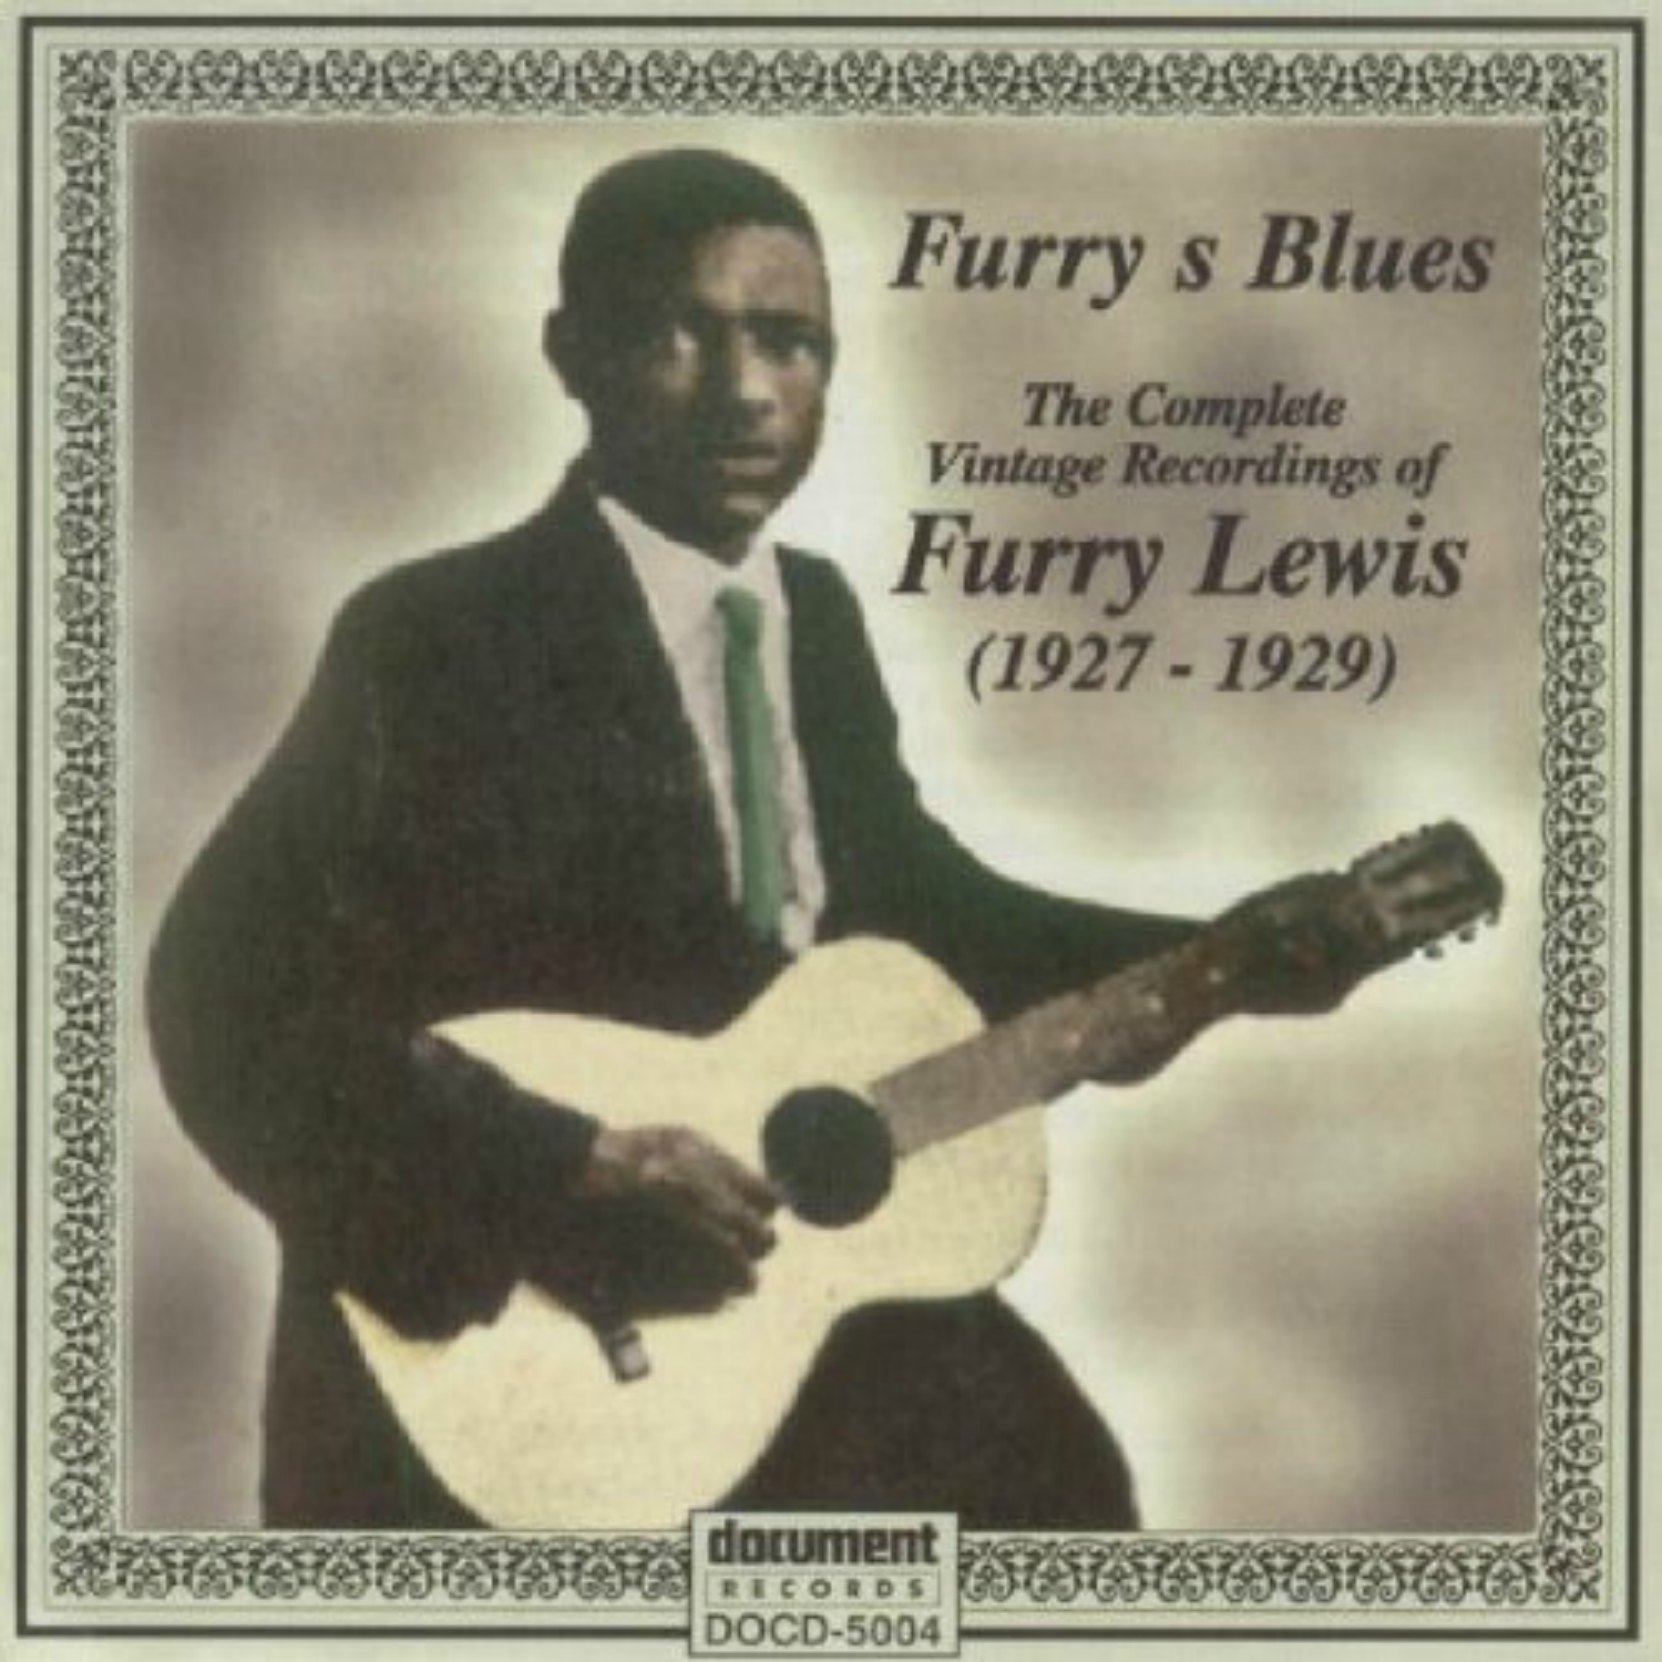 CD cover, Furry's Blues - The Complete Vintage Recordings of Furry Lewis 1927-1929, on Document Records.